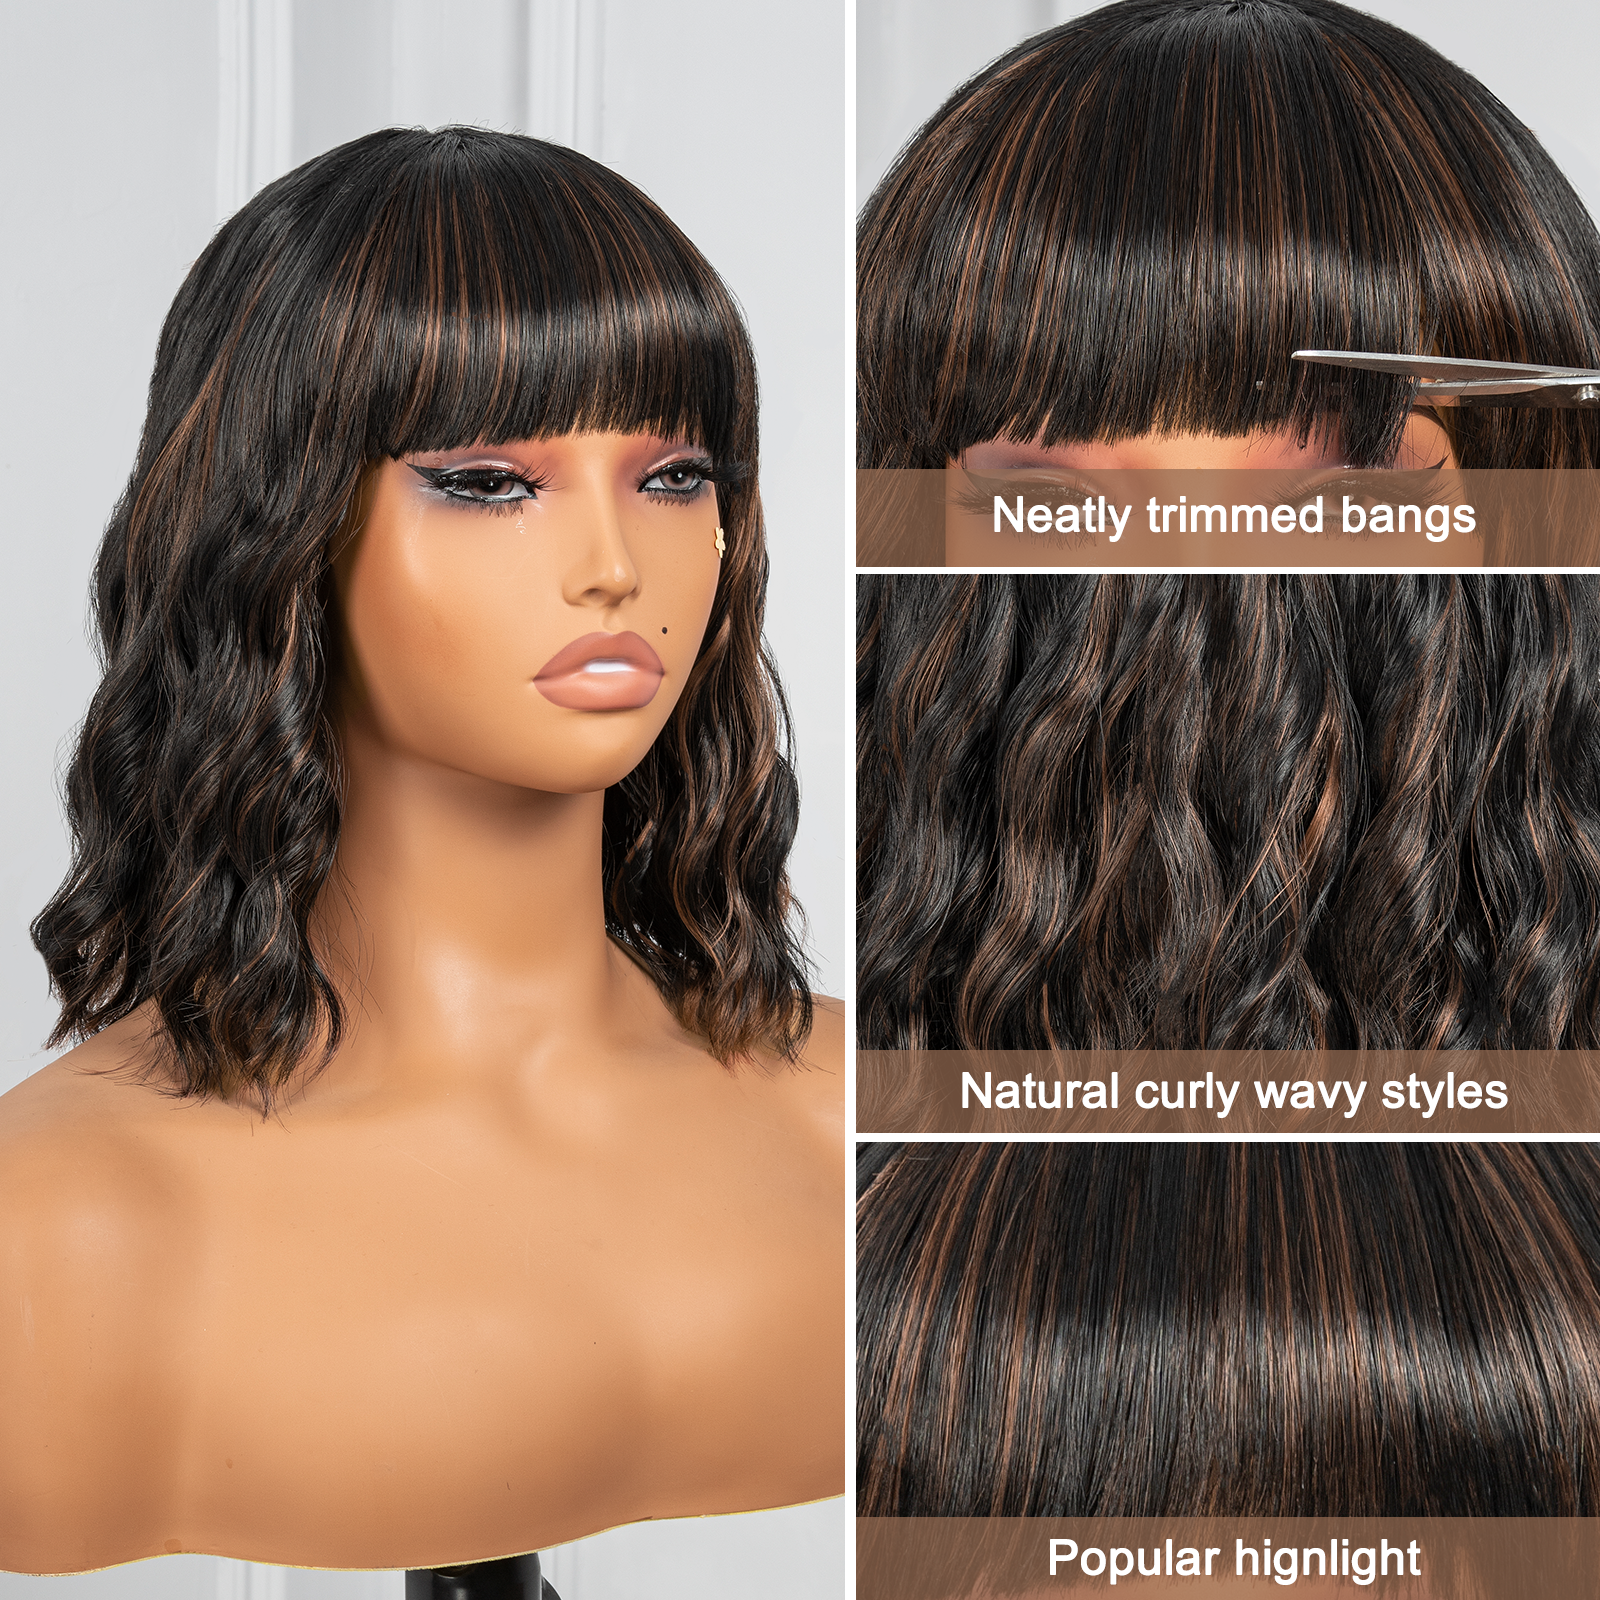 Toyotress Short Wavy Wigs With Bangs - Natural Black Bob Hair Wigs For Black Women, Shoulder Length Curly Synthetic Wigs